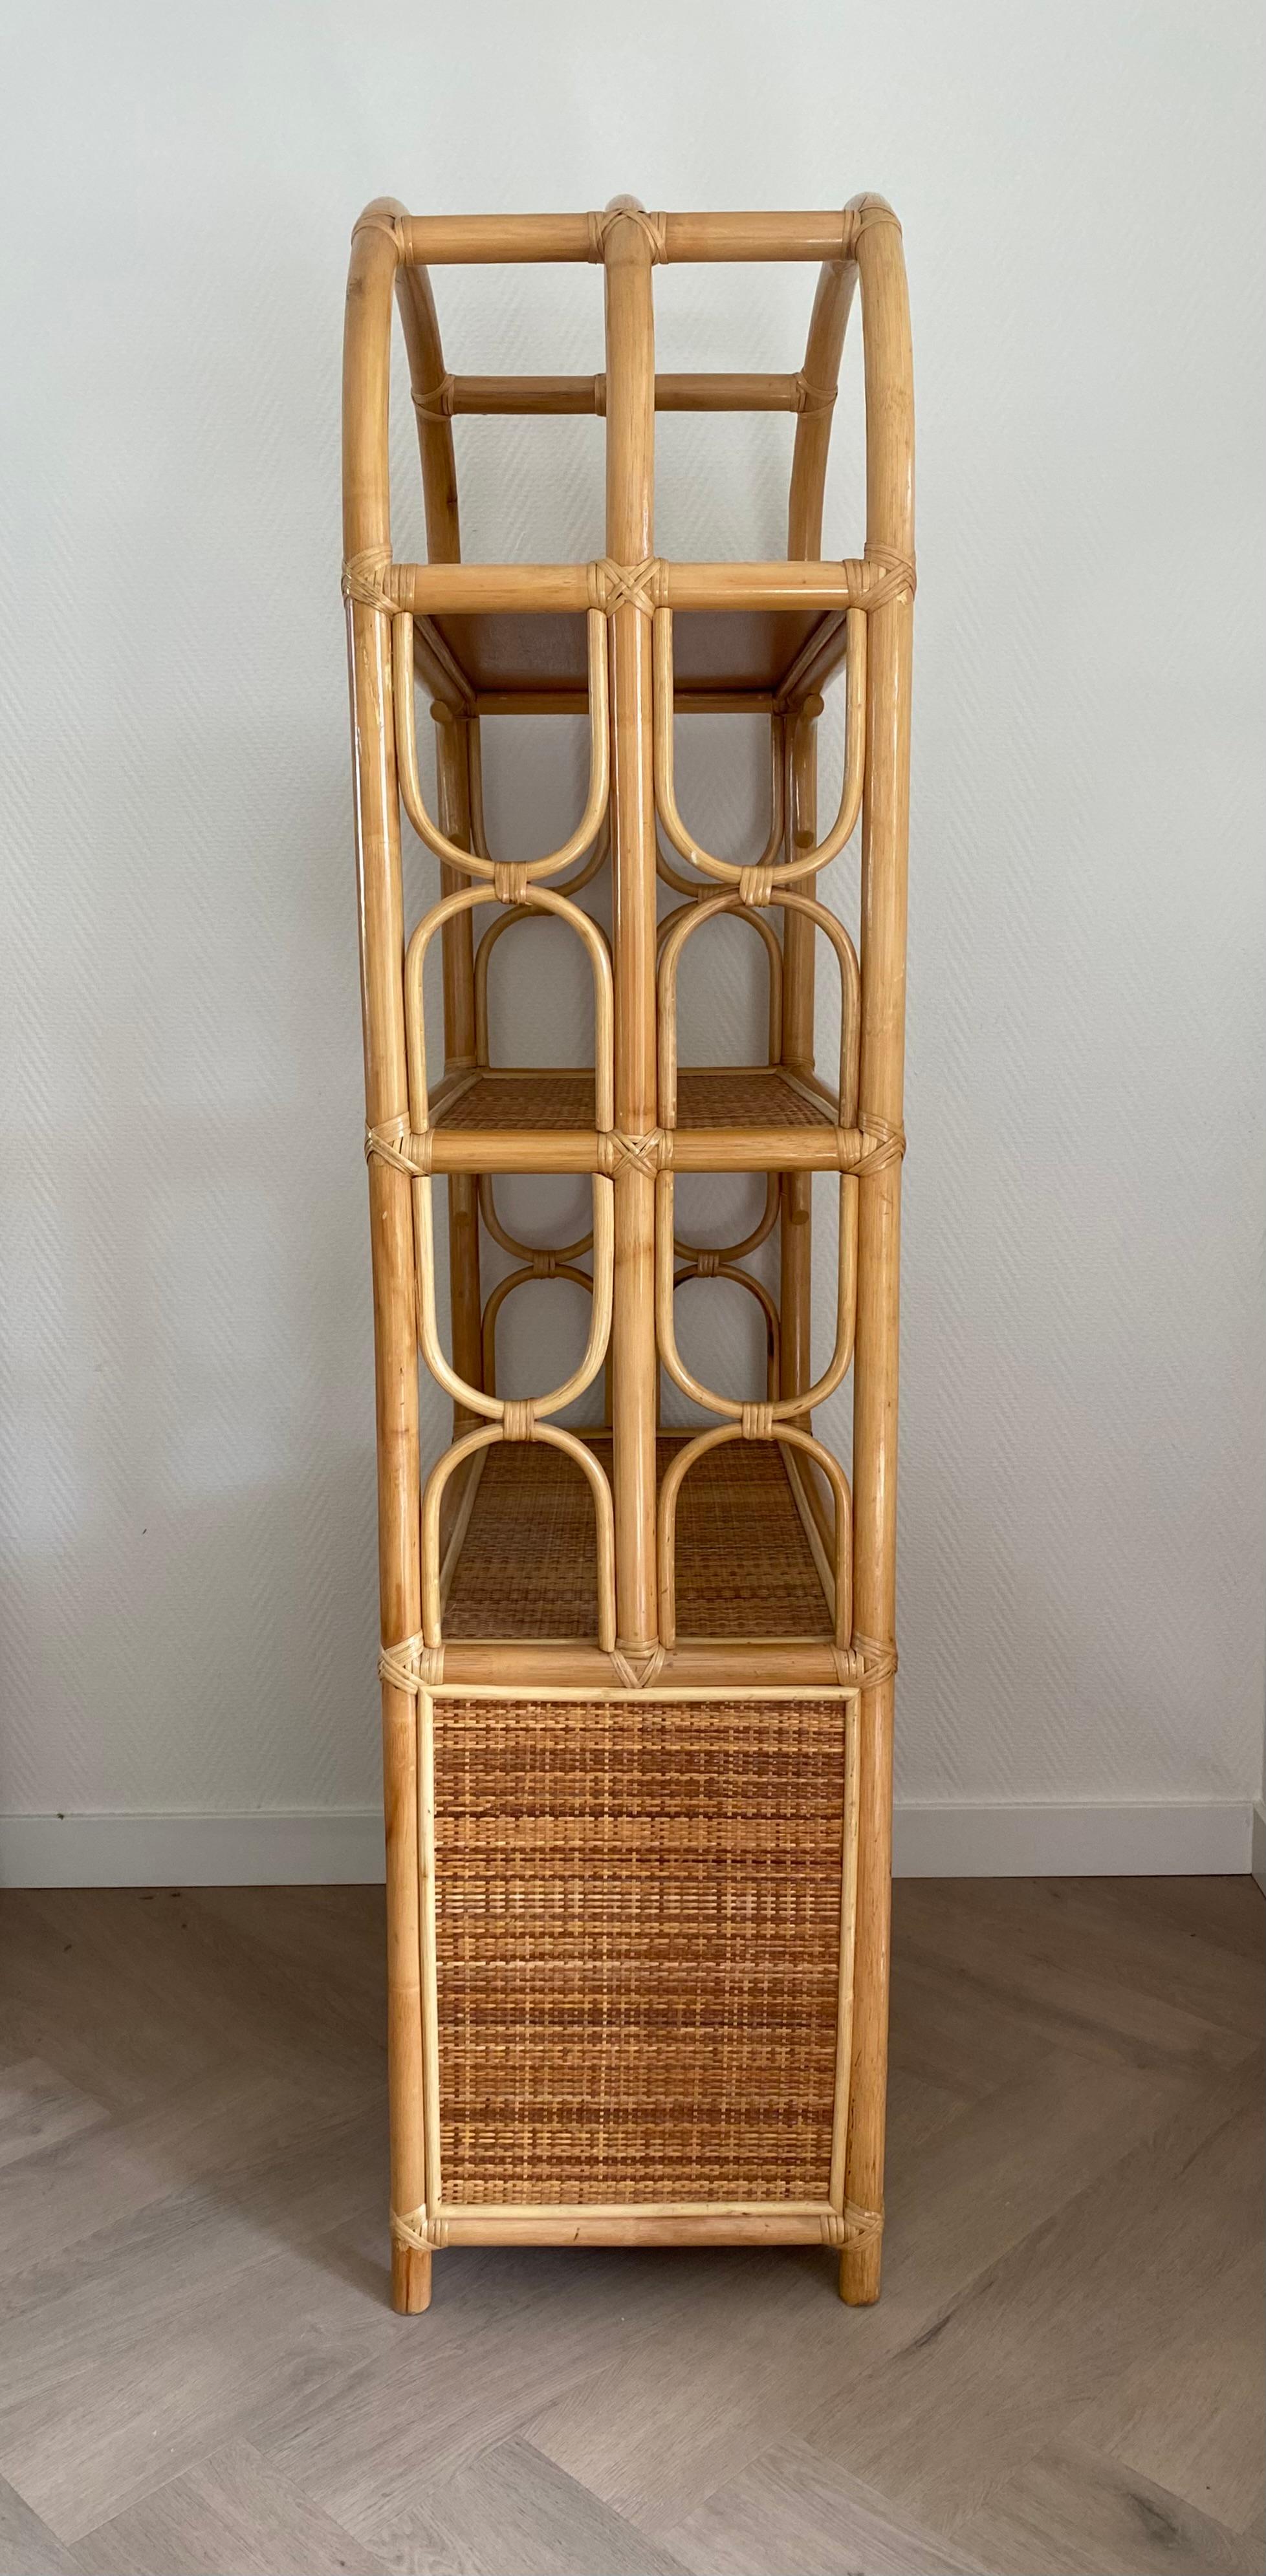 Vintage Rattan Boho Chic Bookcase, Cabinet with doors Ca. 1970s For Sale 5